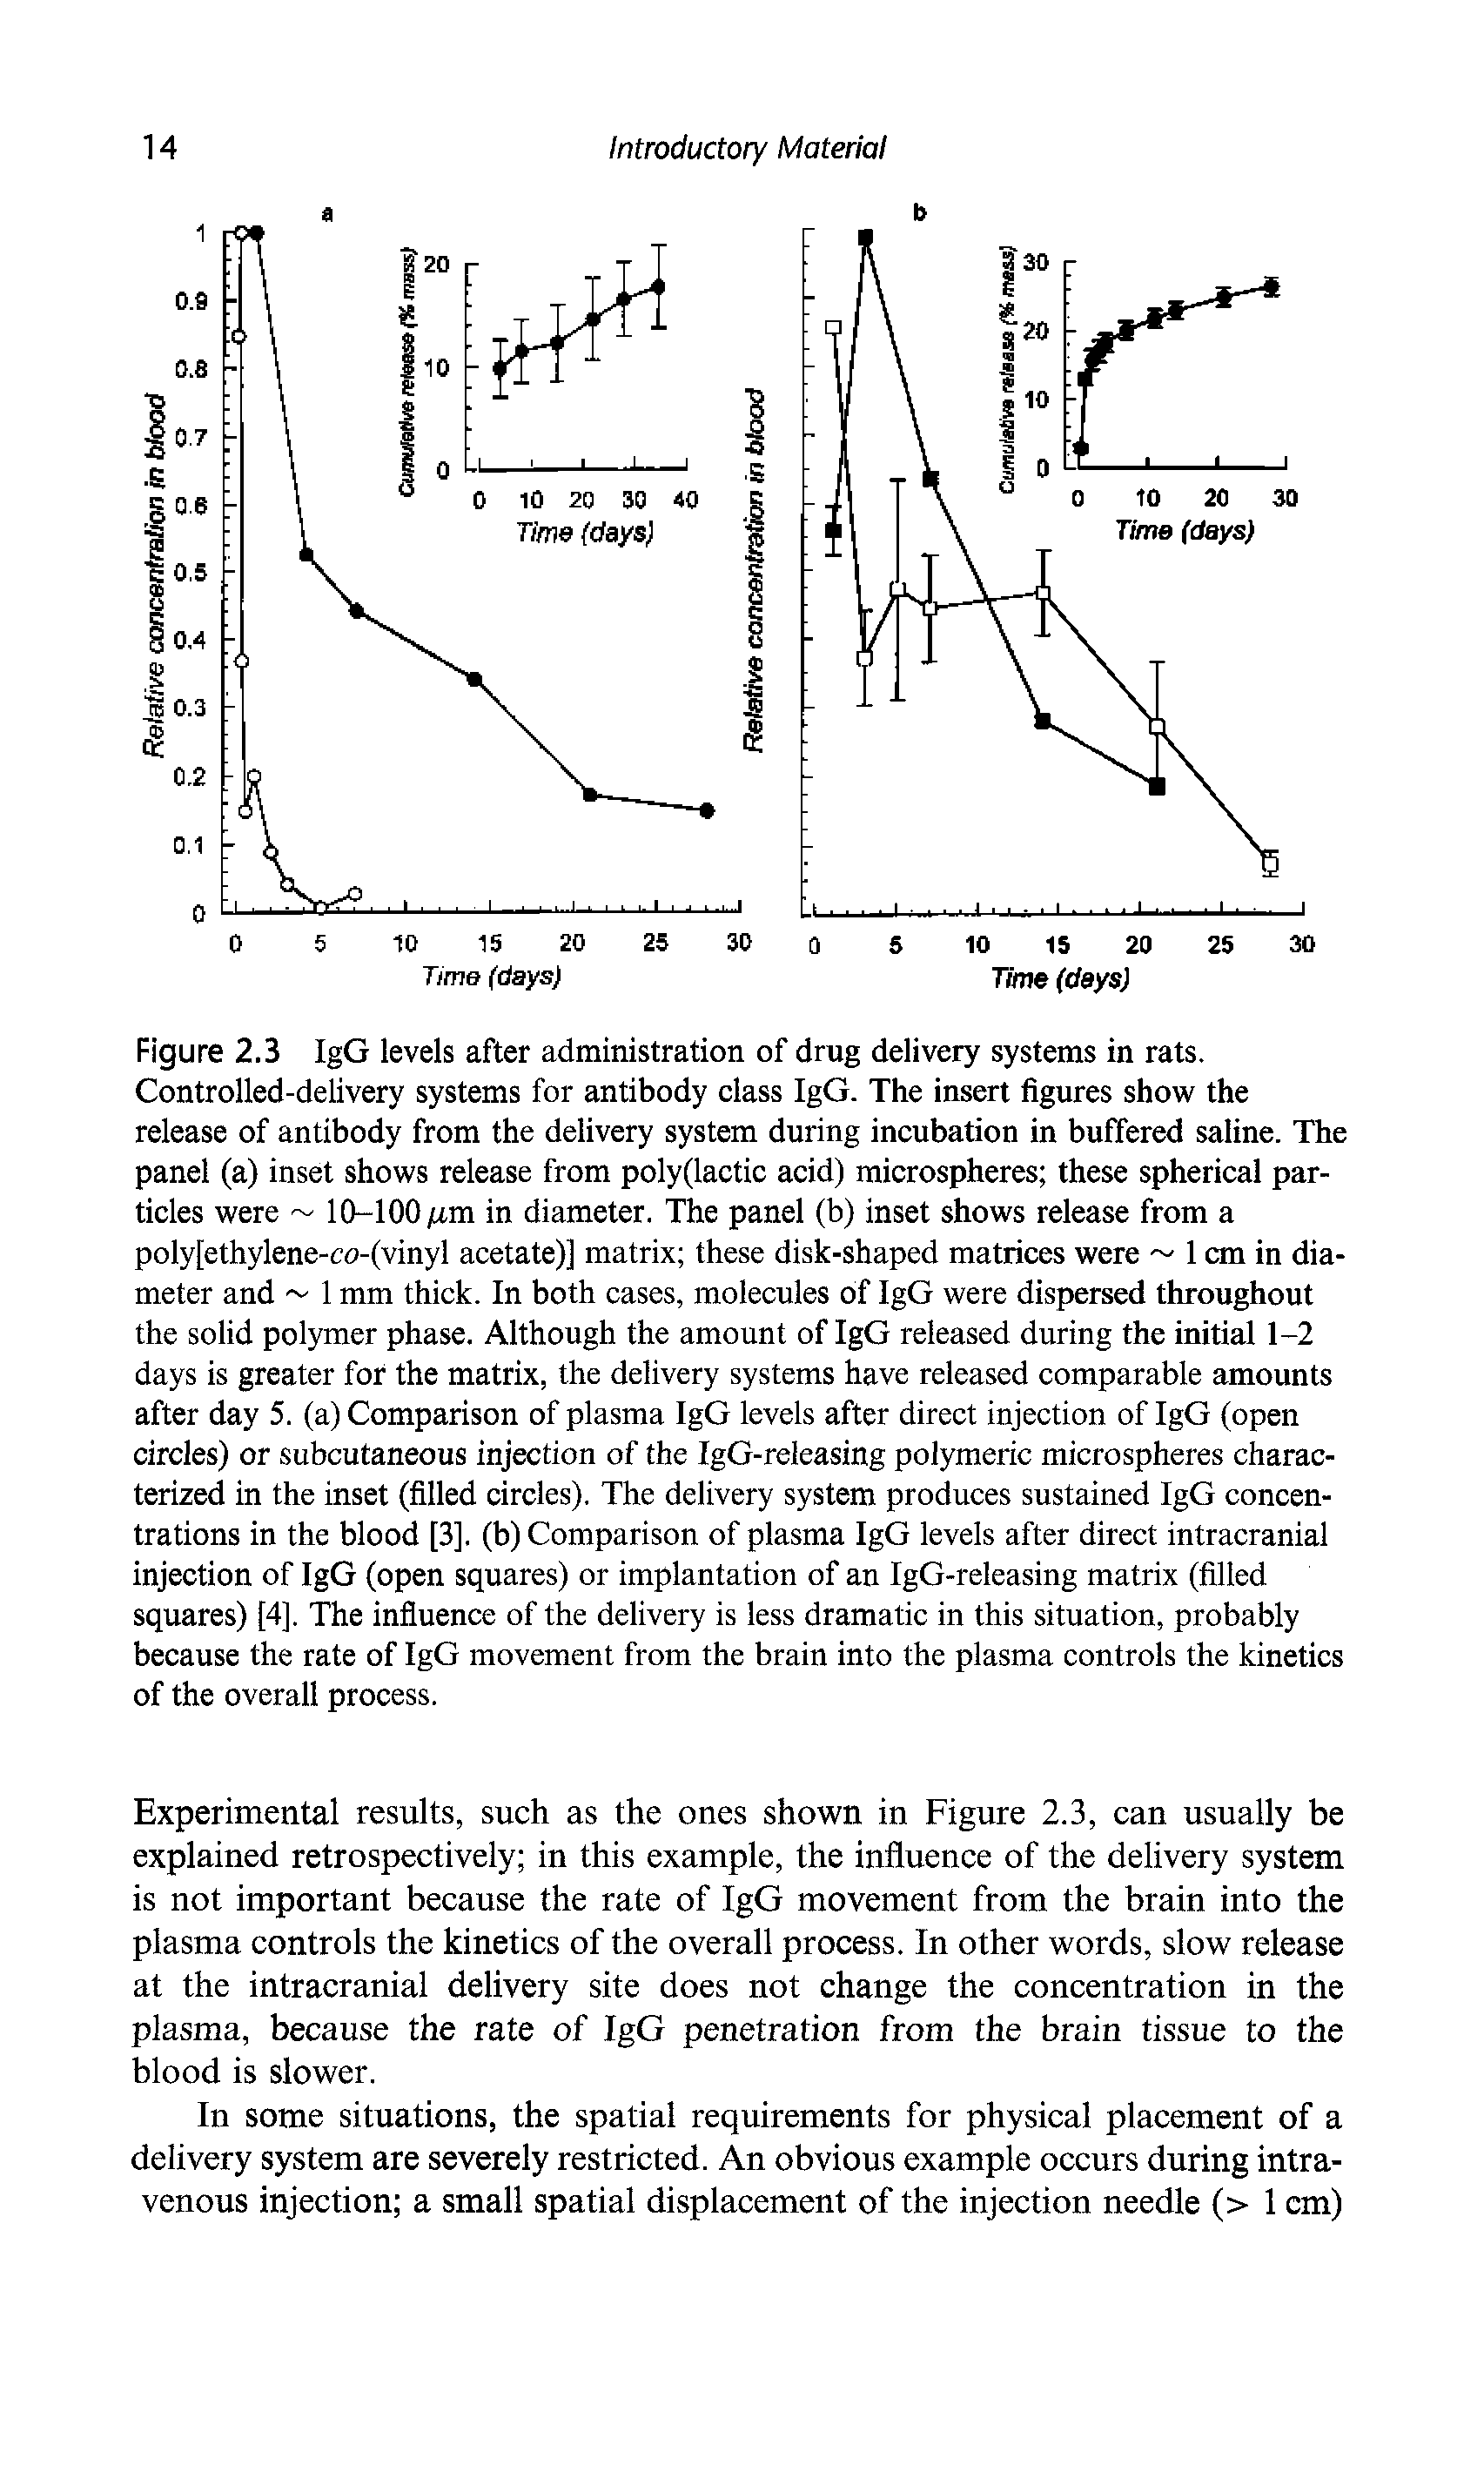 Figure 2.3 IgG levels after administration of drug delivery systems in rats. Controlled-delivery systems for antibody class IgG. The insert figures show the release of antibody from the delivery system during incubation in buffered saline. The panel (a) inset shows release from poly(lactic acid) microspheres these spherical particles were 10-100/rm in diameter. The panel (b) inset shows release from a poly[ethylene-co-(vinyl acetate)] matrix these disk-shaped matrices were 1 cm in diameter and 1 mm thick. In both cases, molecules of IgG were dispersed throughout the solid polymer phase. Although the amount of IgG released during the initial 1-2 days is greater for the matrix, the delivery systems have released comparable amounts after day 5. (a) Comparison of plasma IgG levels after direct injection of IgG (open circles) or subcutaneous injection of the IgG-releasing polymeric microspheres characterized in the inset (filled circles). The delivery system produces sustained IgG concentrations in the blood [3]. (b) Comparison of plasma IgG levels after direct intracranial injection of IgG (open squares) or implantation of an IgG-releasing matrix (filled squares) [4]. The influence of the delivery is less dramatic in this situation, probably because the rate of IgG movement from the brain into the plasma controls the kinetics of the overall process.